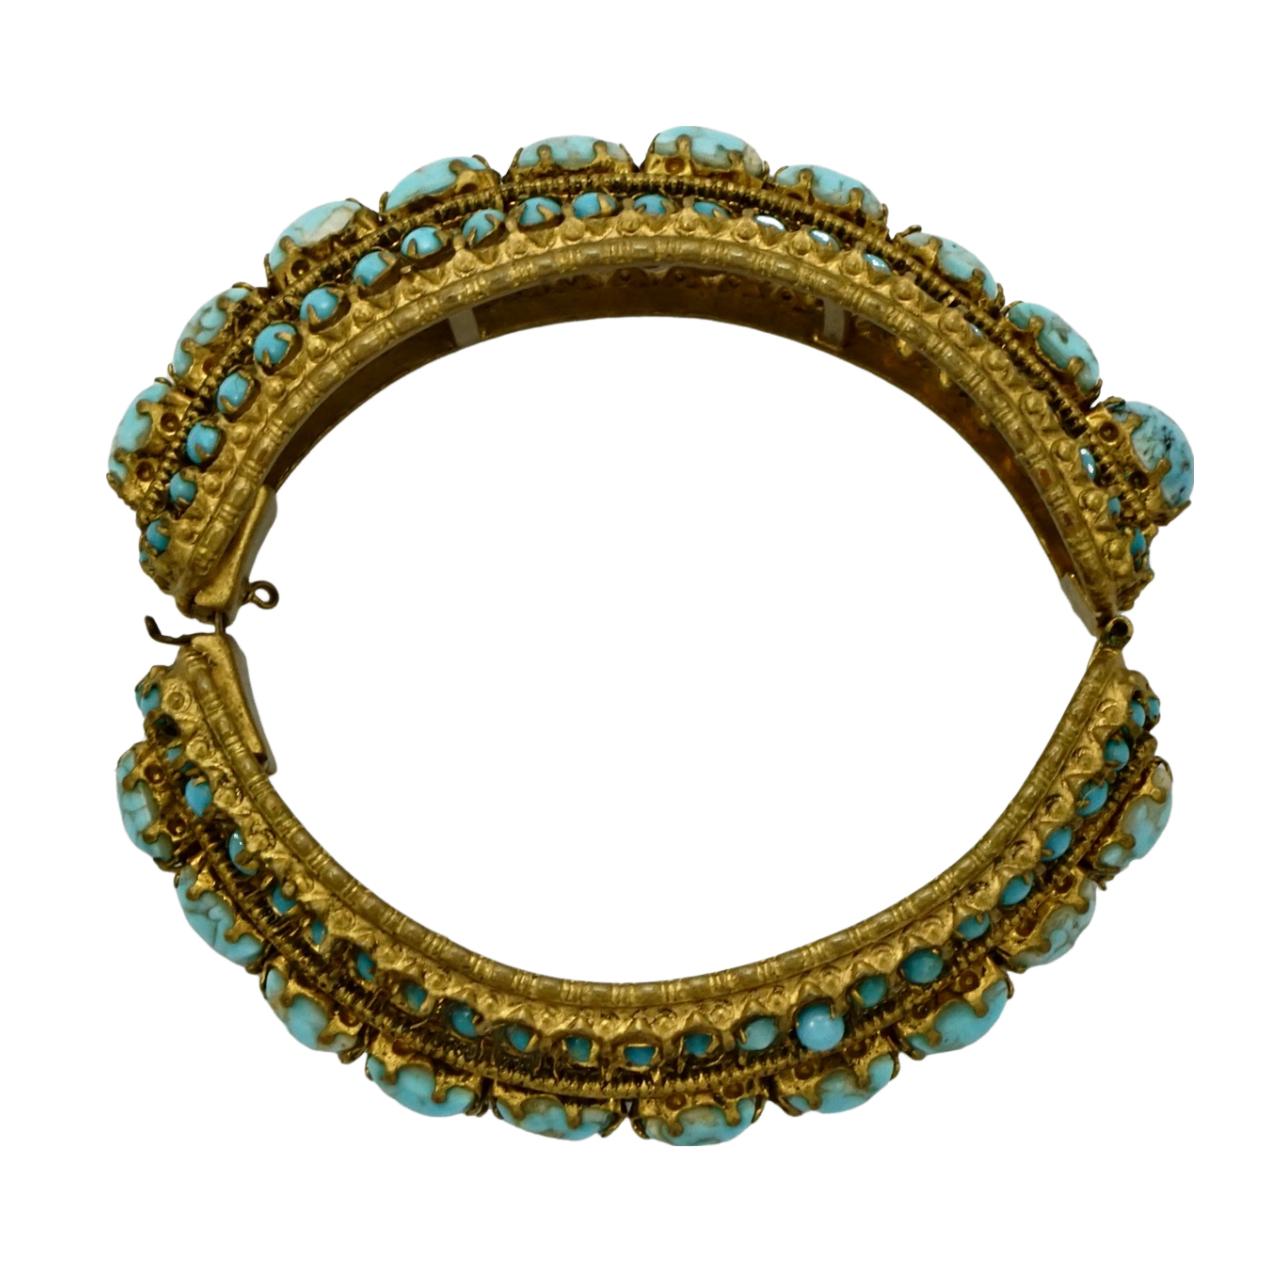 Gold Plated and Black Enamel Bangle Bracelet with Faux Turquoise Stones For Sale 1